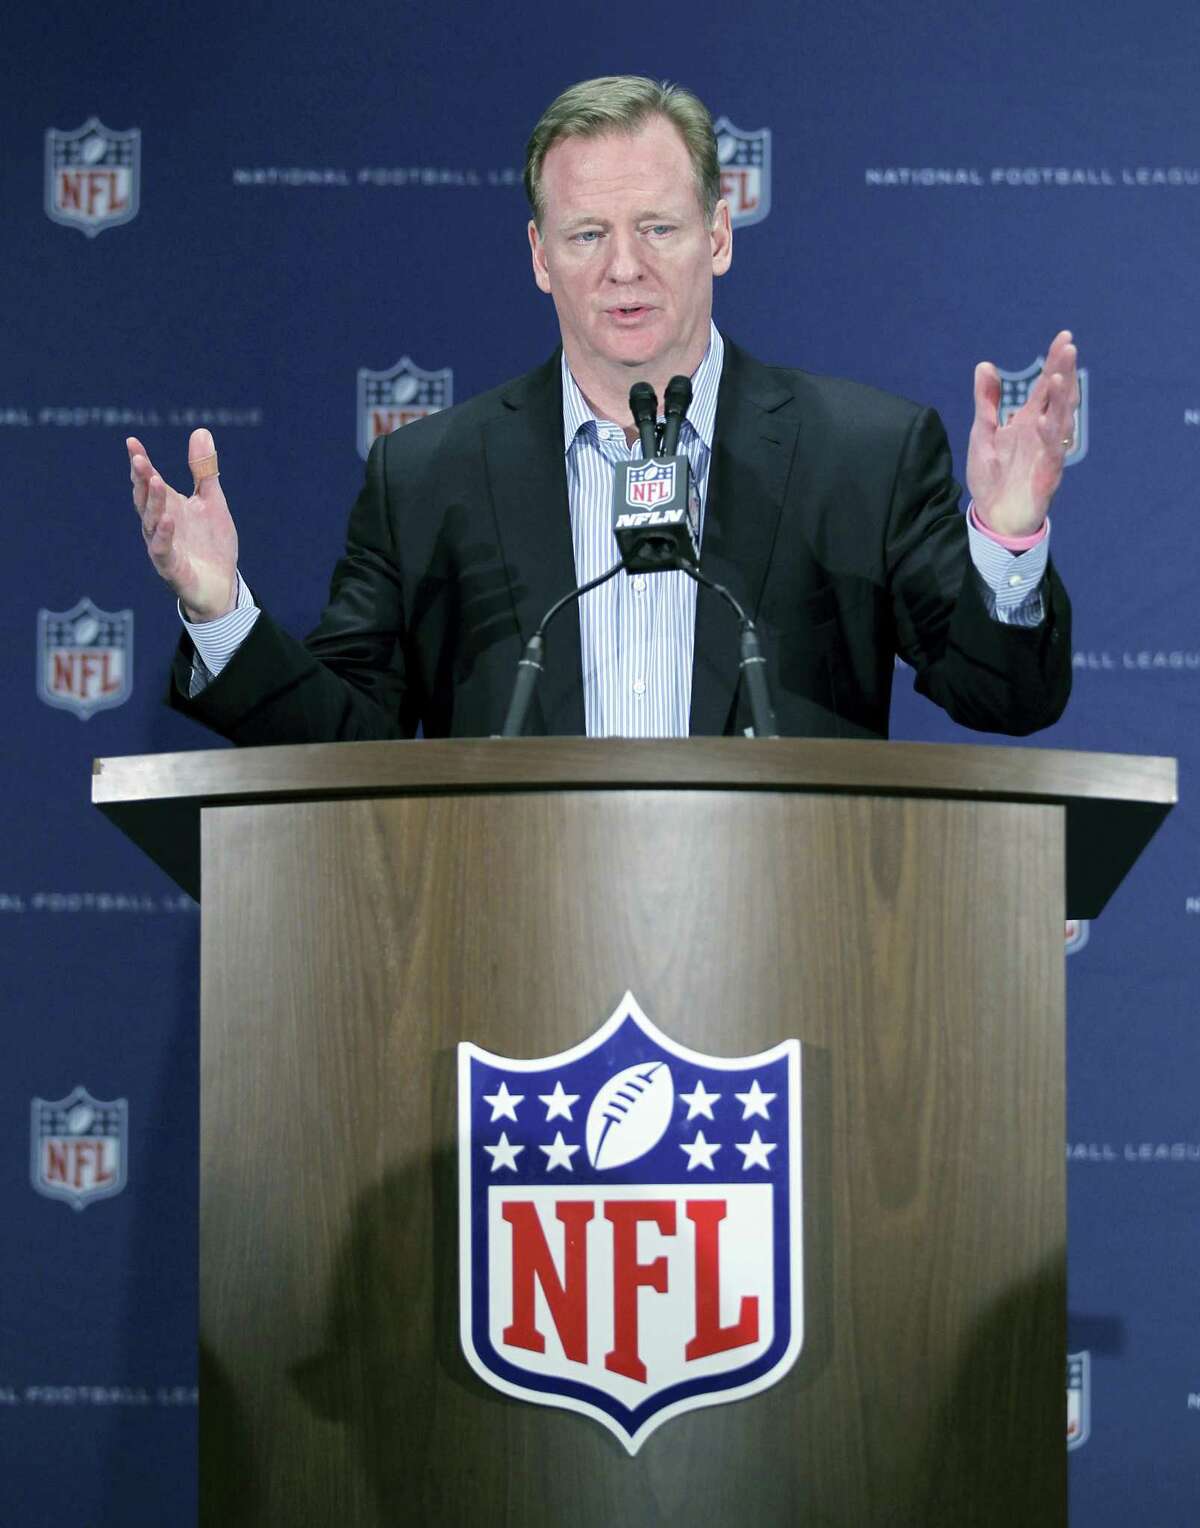 NFL Commissioner Roger Goodell gestures during a press conference. The NFL has demanded The New York Times retract a story that called the league’s concussion research flawed and likened the NFL’s handling of head trauma to the tobacco industry’s response to the dangers of cigarettes. In a letter from its law firm to the general counsels of the newspaper and obtained by The Associated Press on Tuesday, the league said it was defamed by the Times.